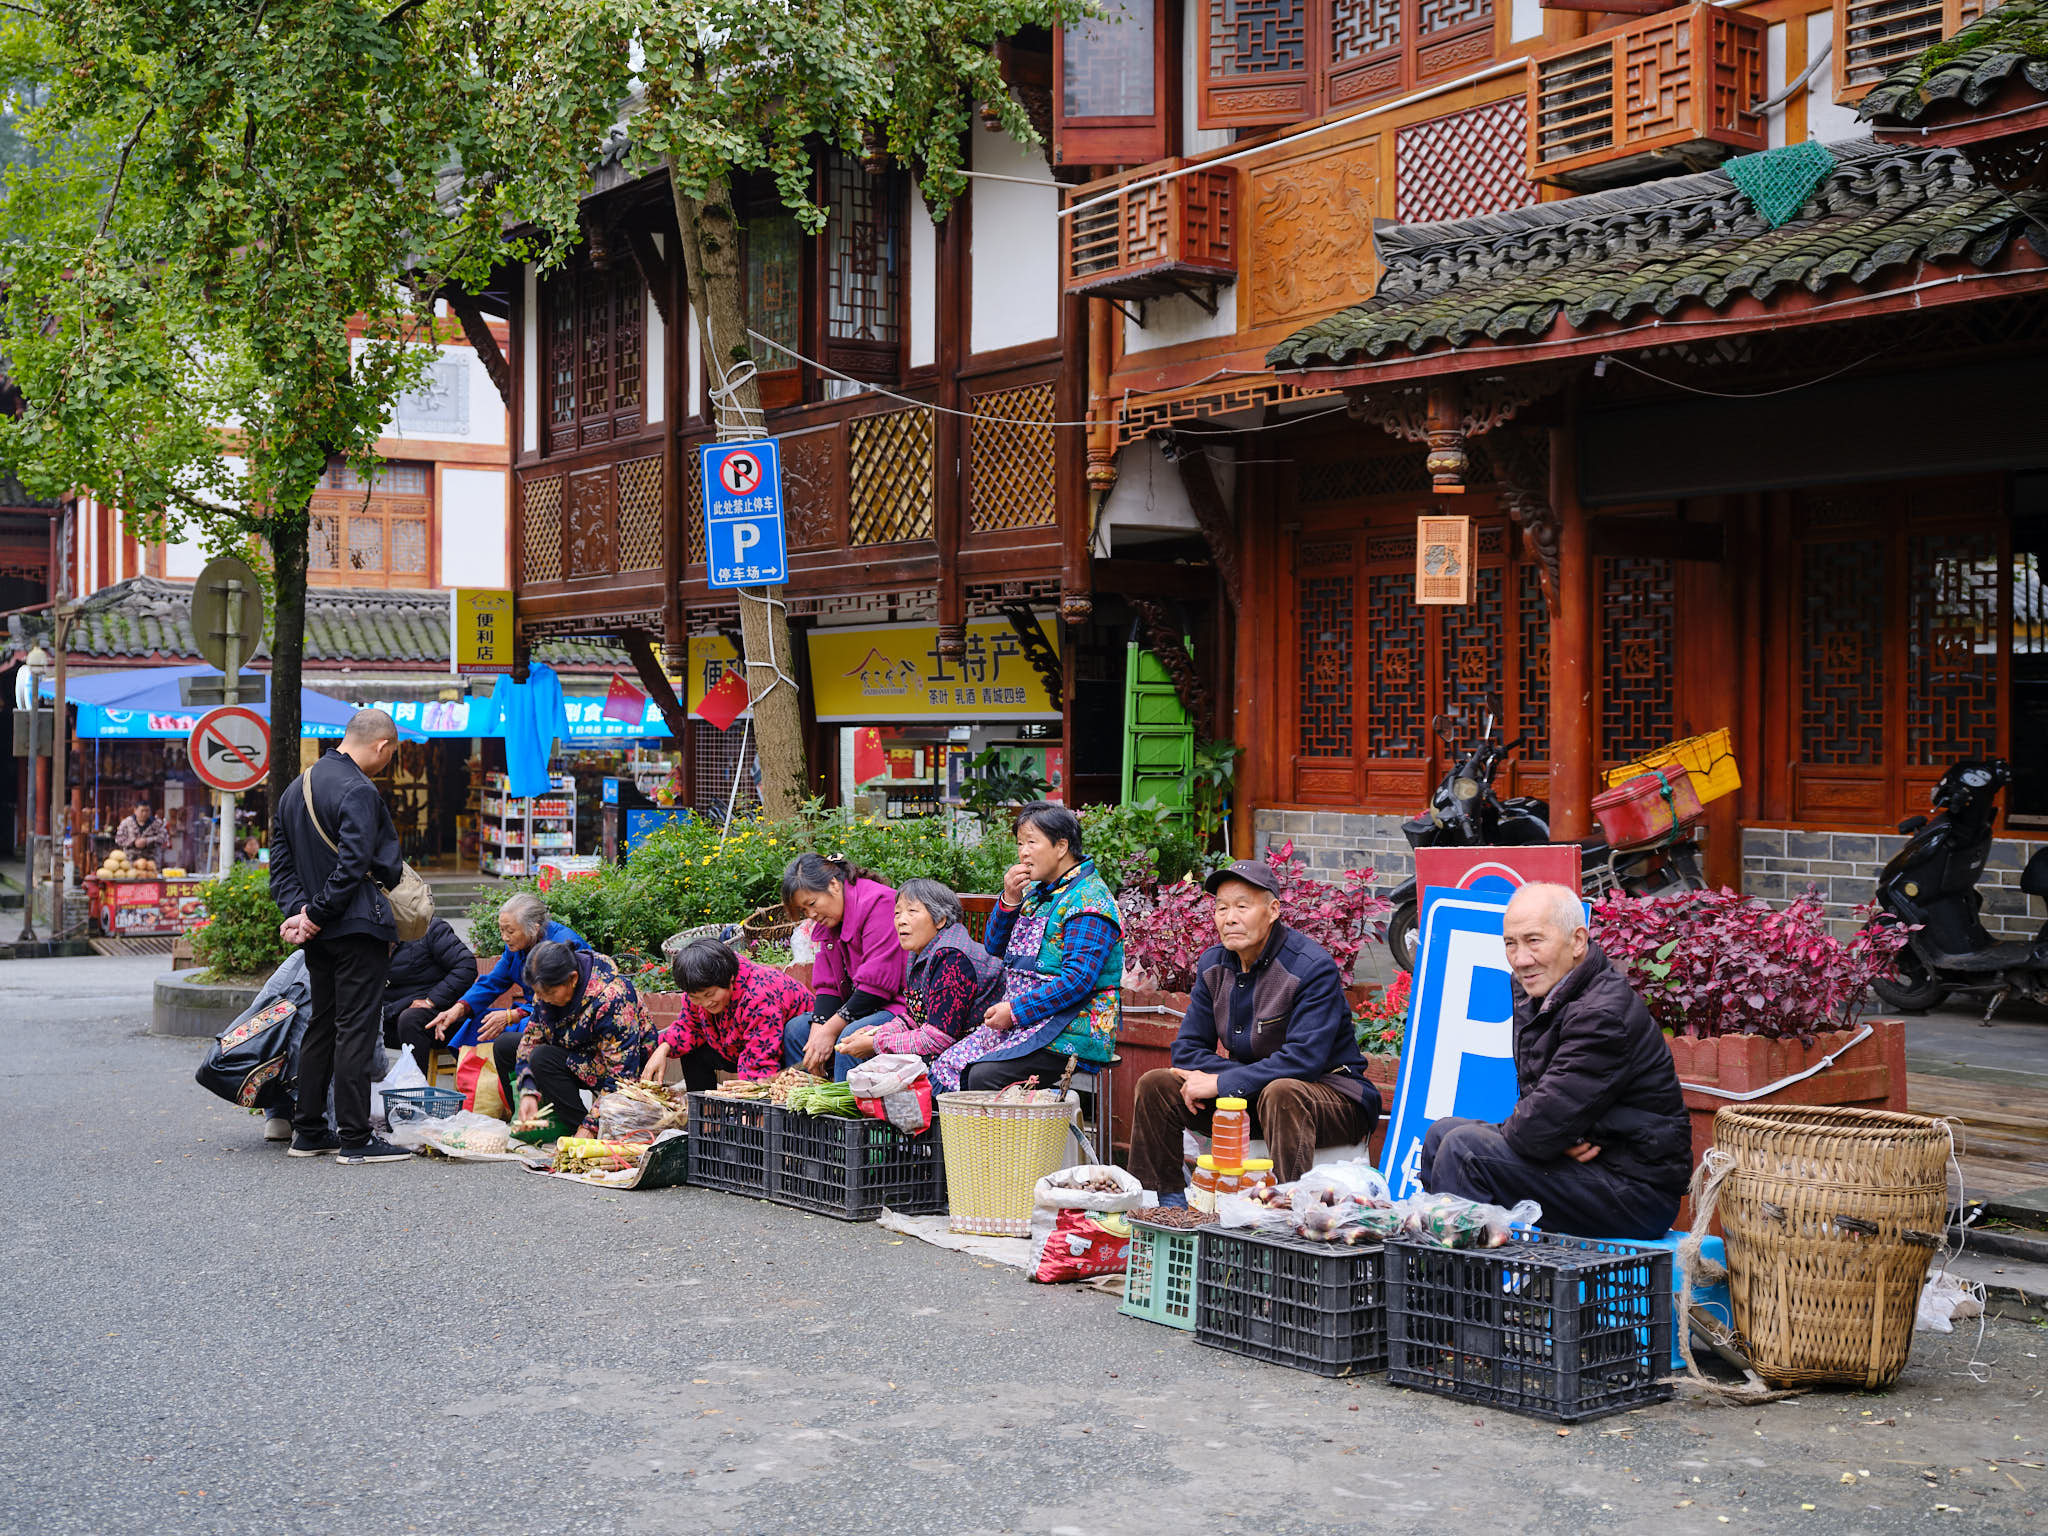 Villagers selling their wares at Qingcheng Village